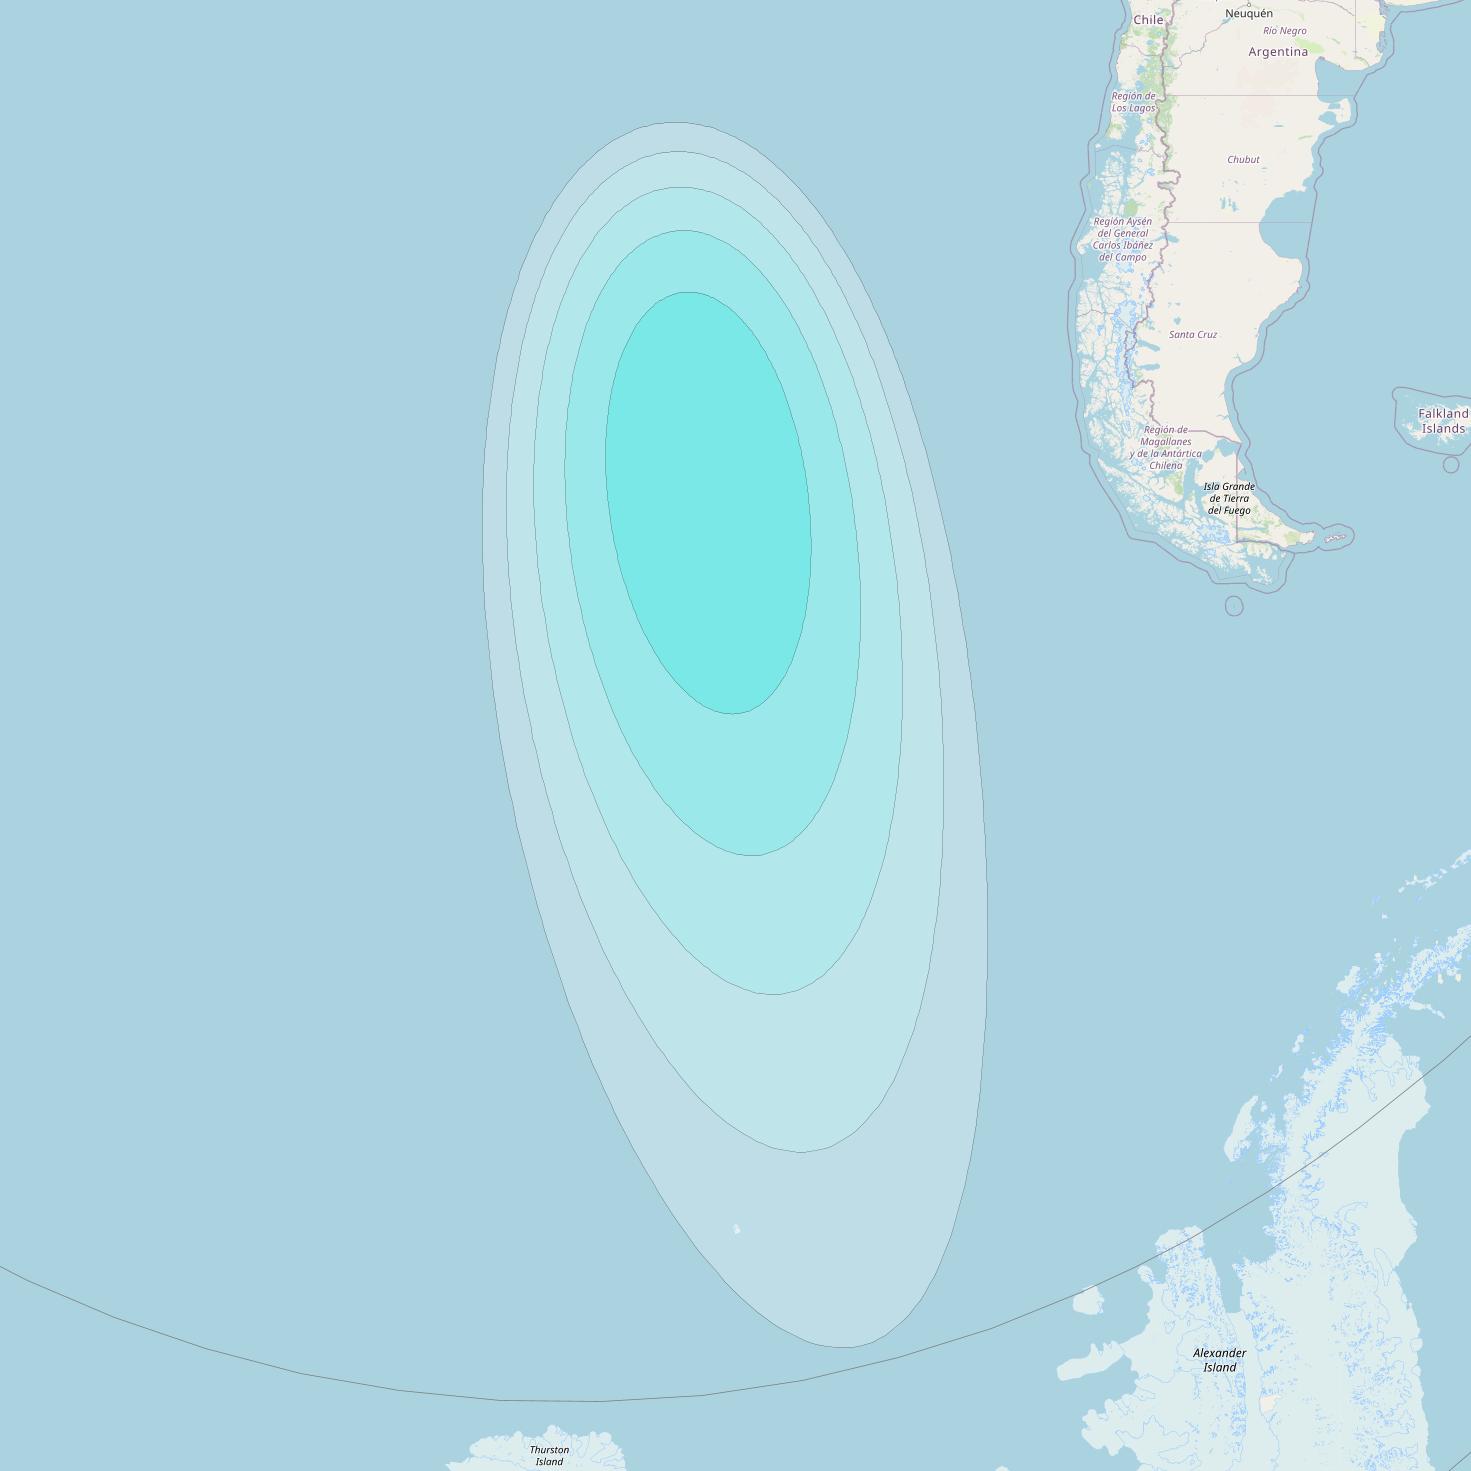 Inmarsat-4F3 at 98° W downlink L-band S098 User Spot beam coverage map